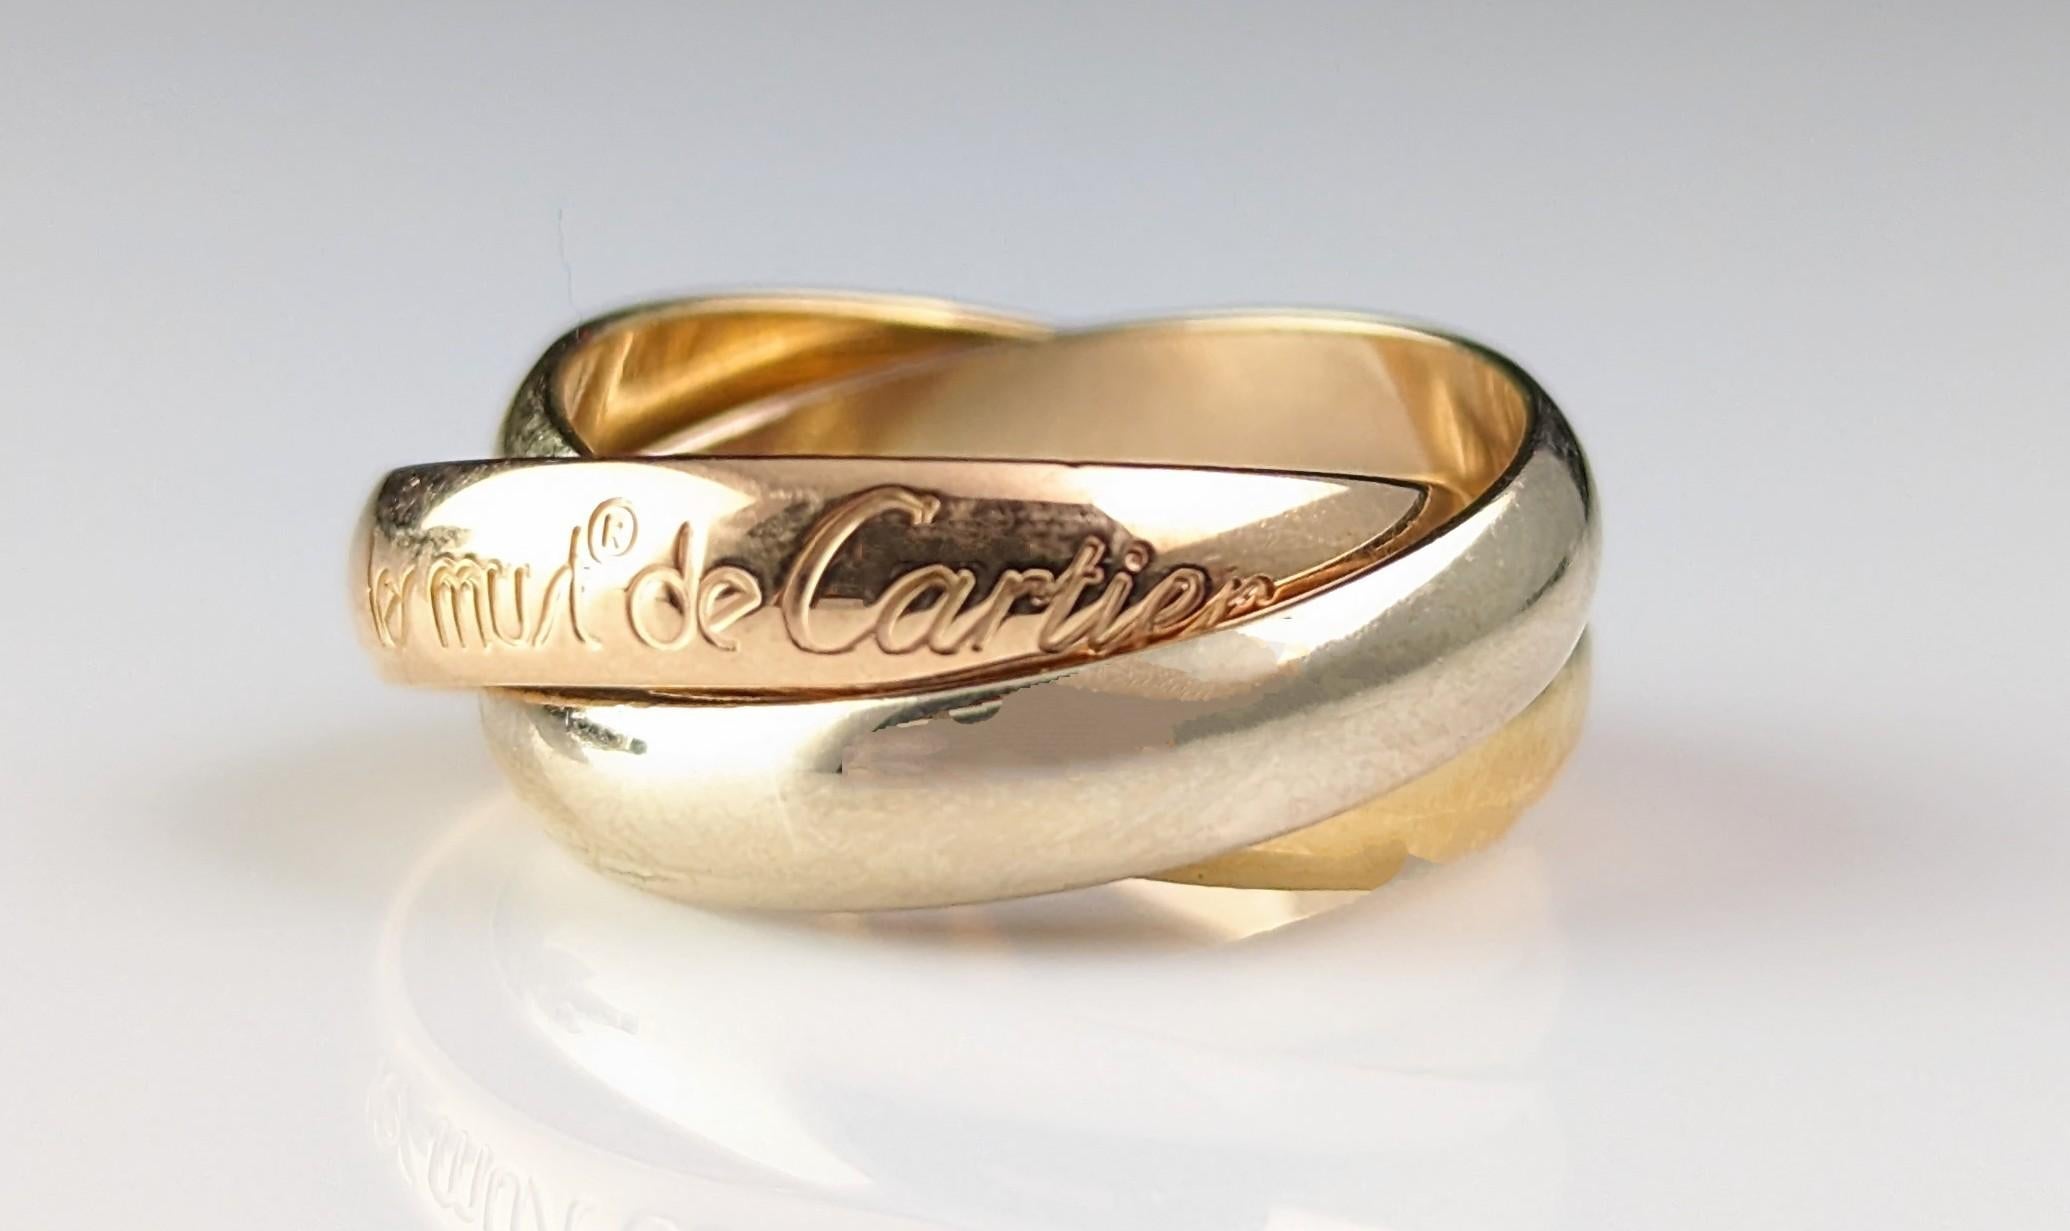 A beautiful vintage Les Must de Cartier Trinity ring.

From the timeless classic range produced by Cartier in 80s and 90s, it is a design based on the classic triple wedding band and consists of three interlocking bands.

The band's are three